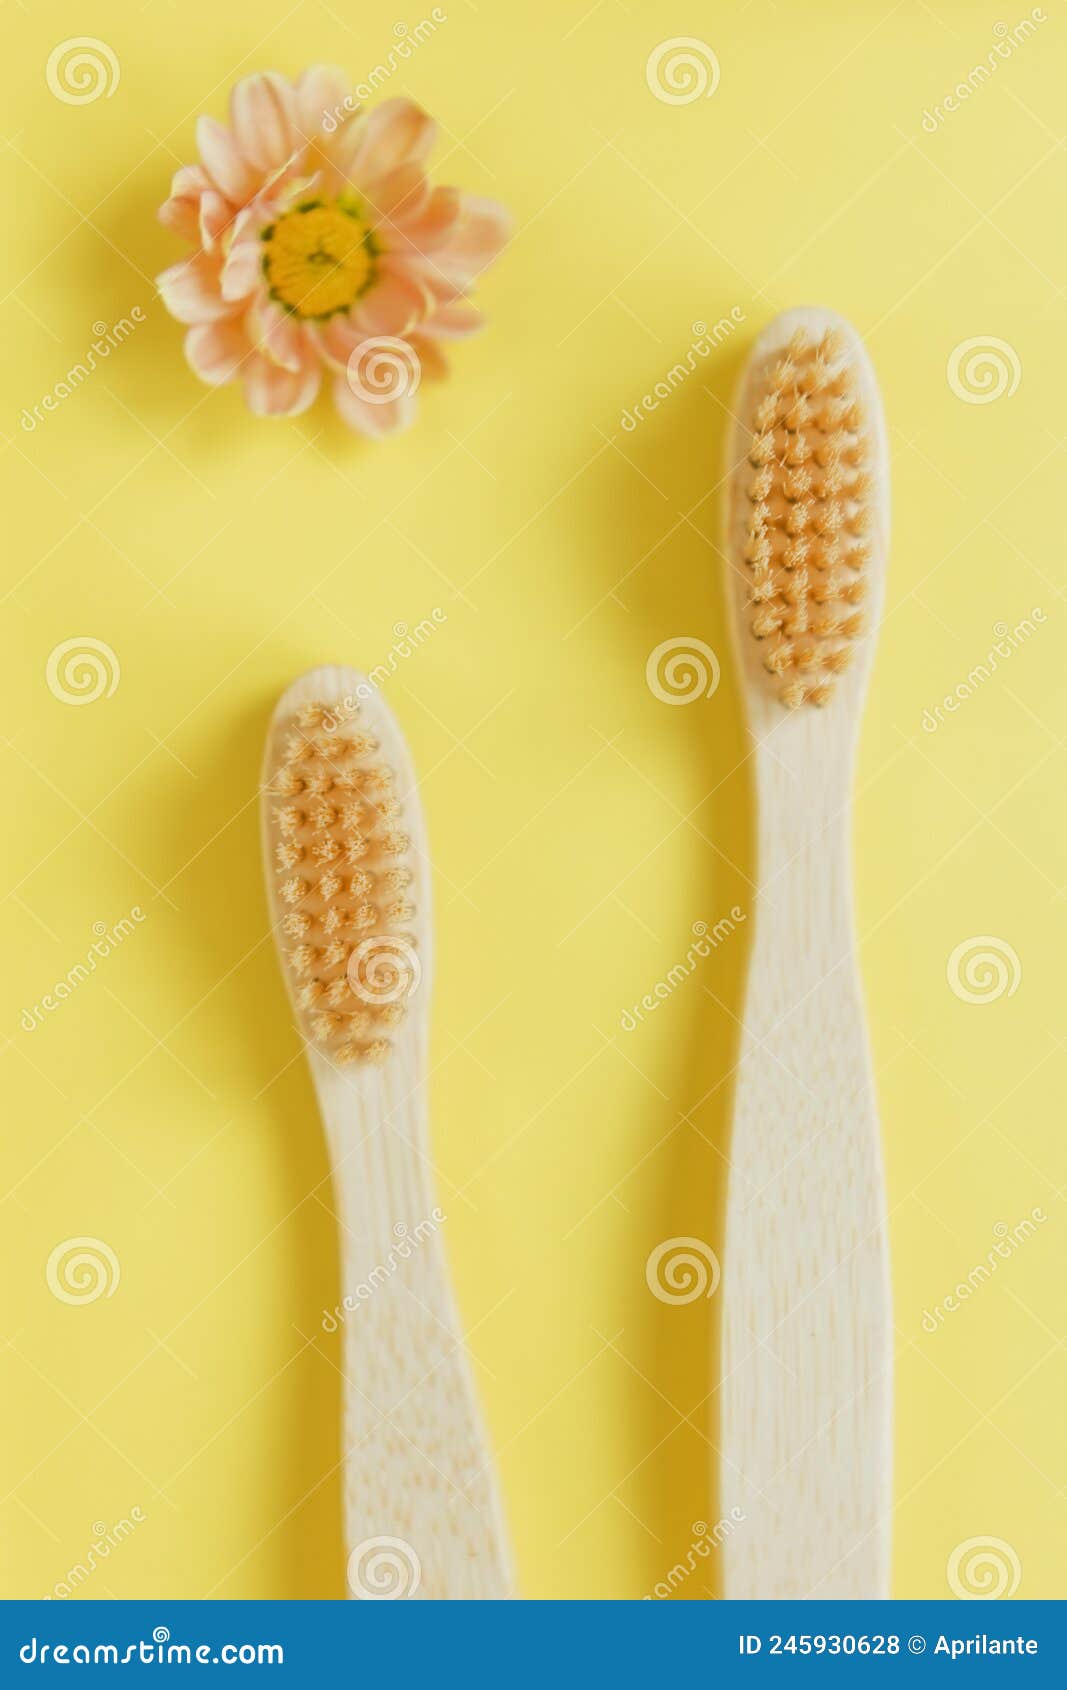 wooden bamboo toothbrush on yellow background